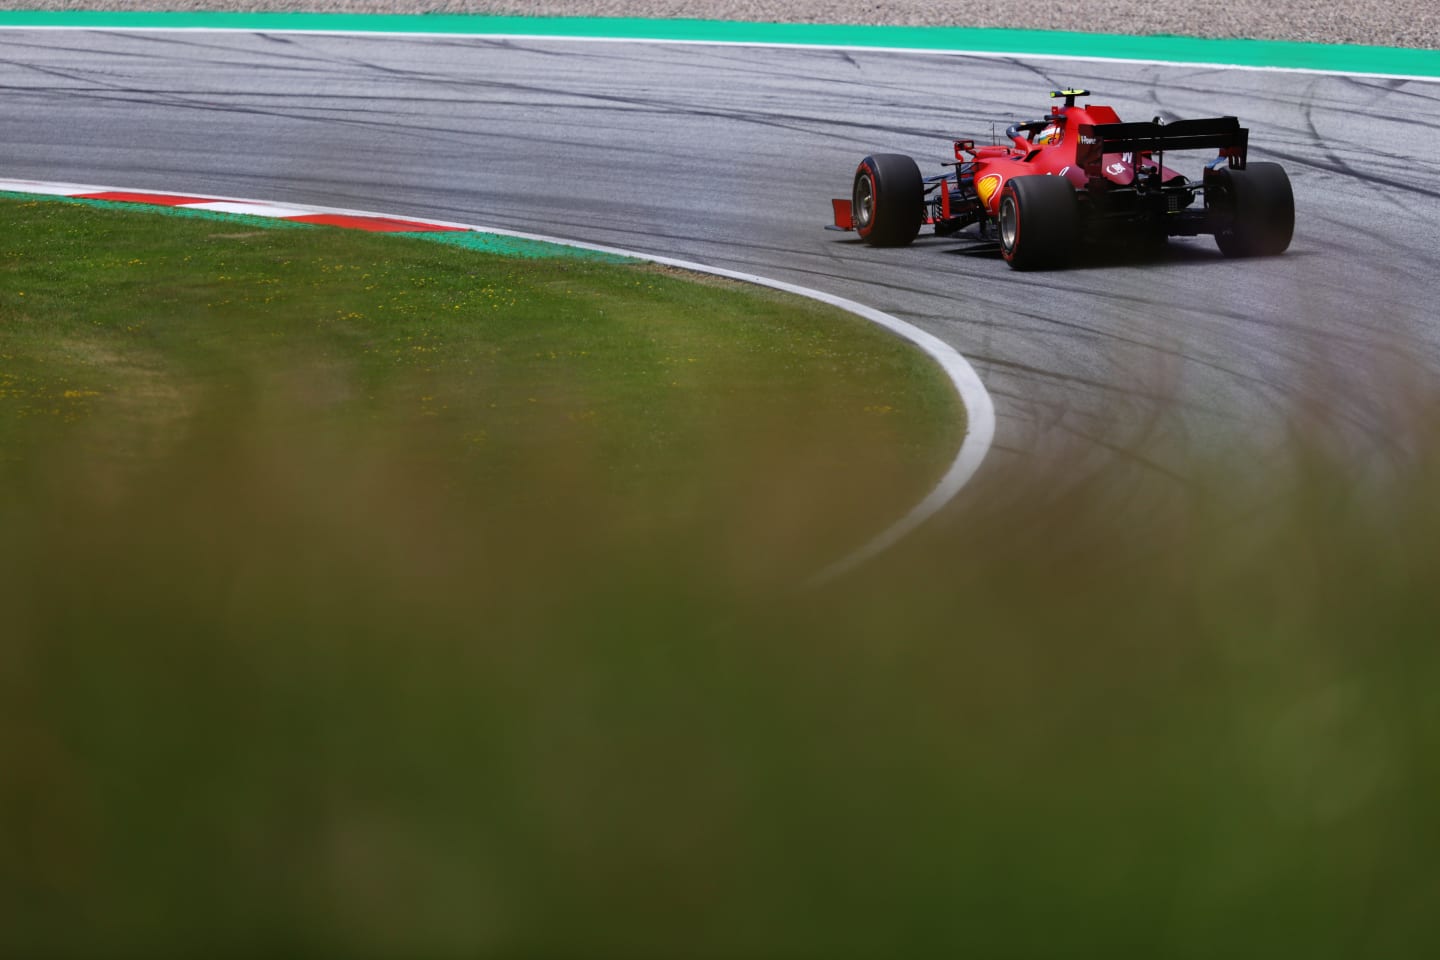 SPIELBERG, AUSTRIA - JUNE 26: Carlos Sainz of Spain driving the (55) Scuderia Ferrari SF21 on track during final practice ahead of the F1 Grand Prix of Styria at Red Bull Ring on June 26, 2021 in Spielberg, Austria. (Photo by Bryn Lennon/Getty Images)